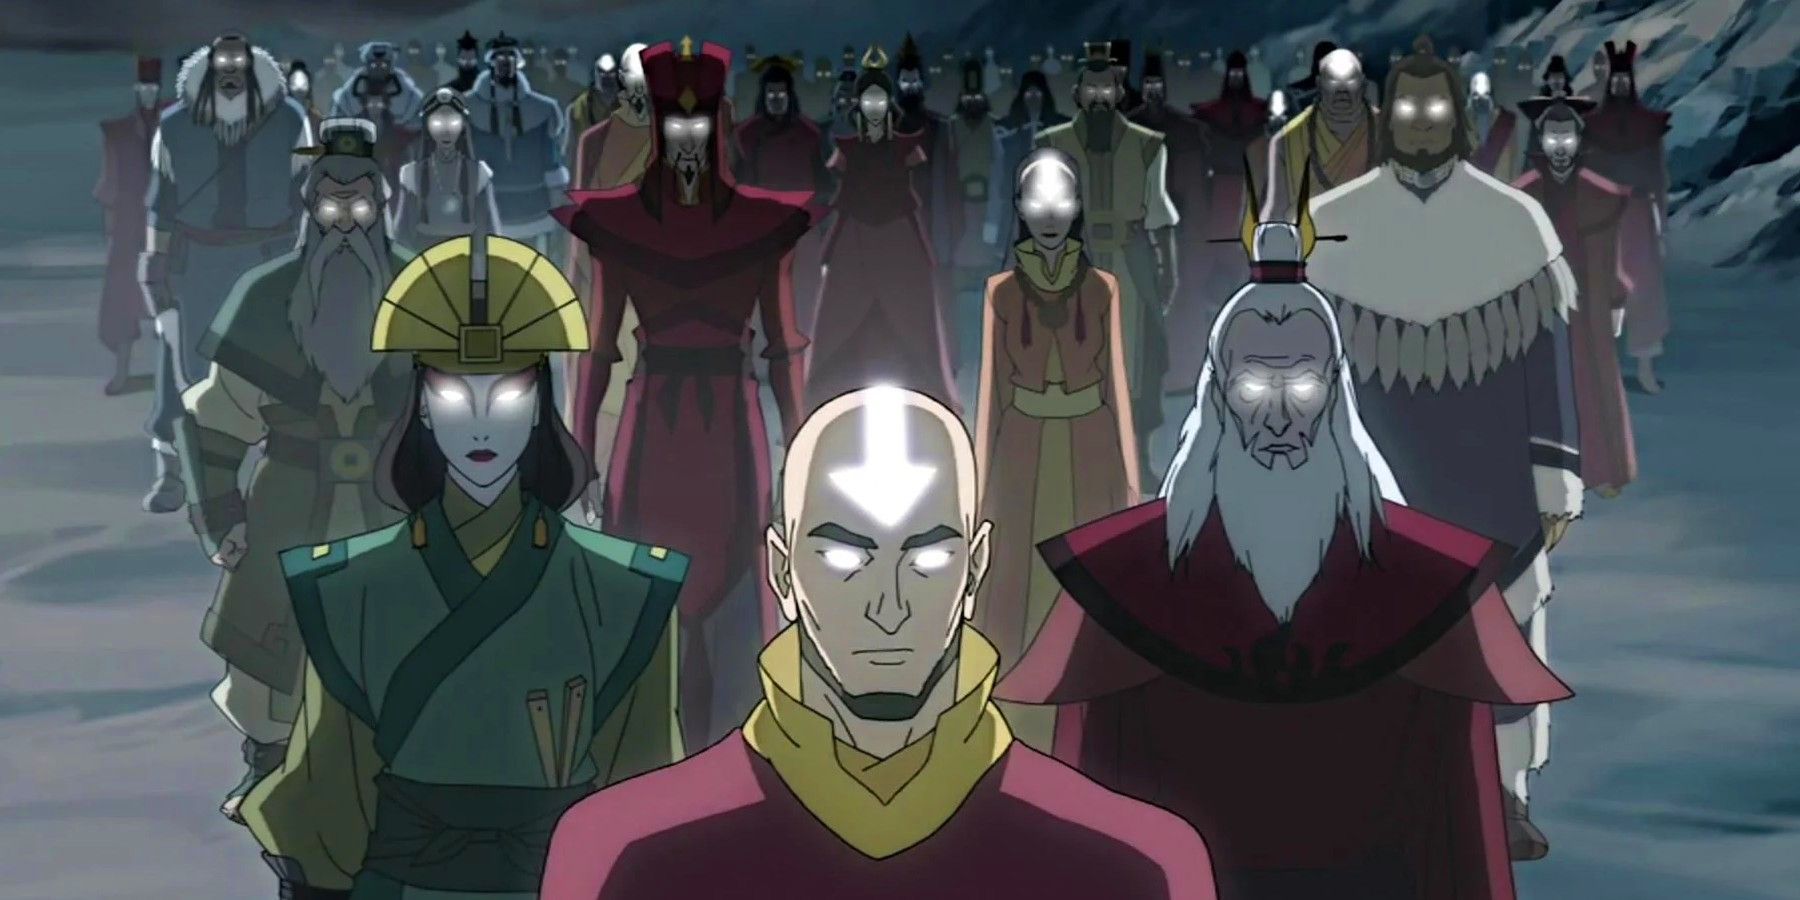 Avatars Aang, Roku, and Kyoshi stand in front of their predecessors